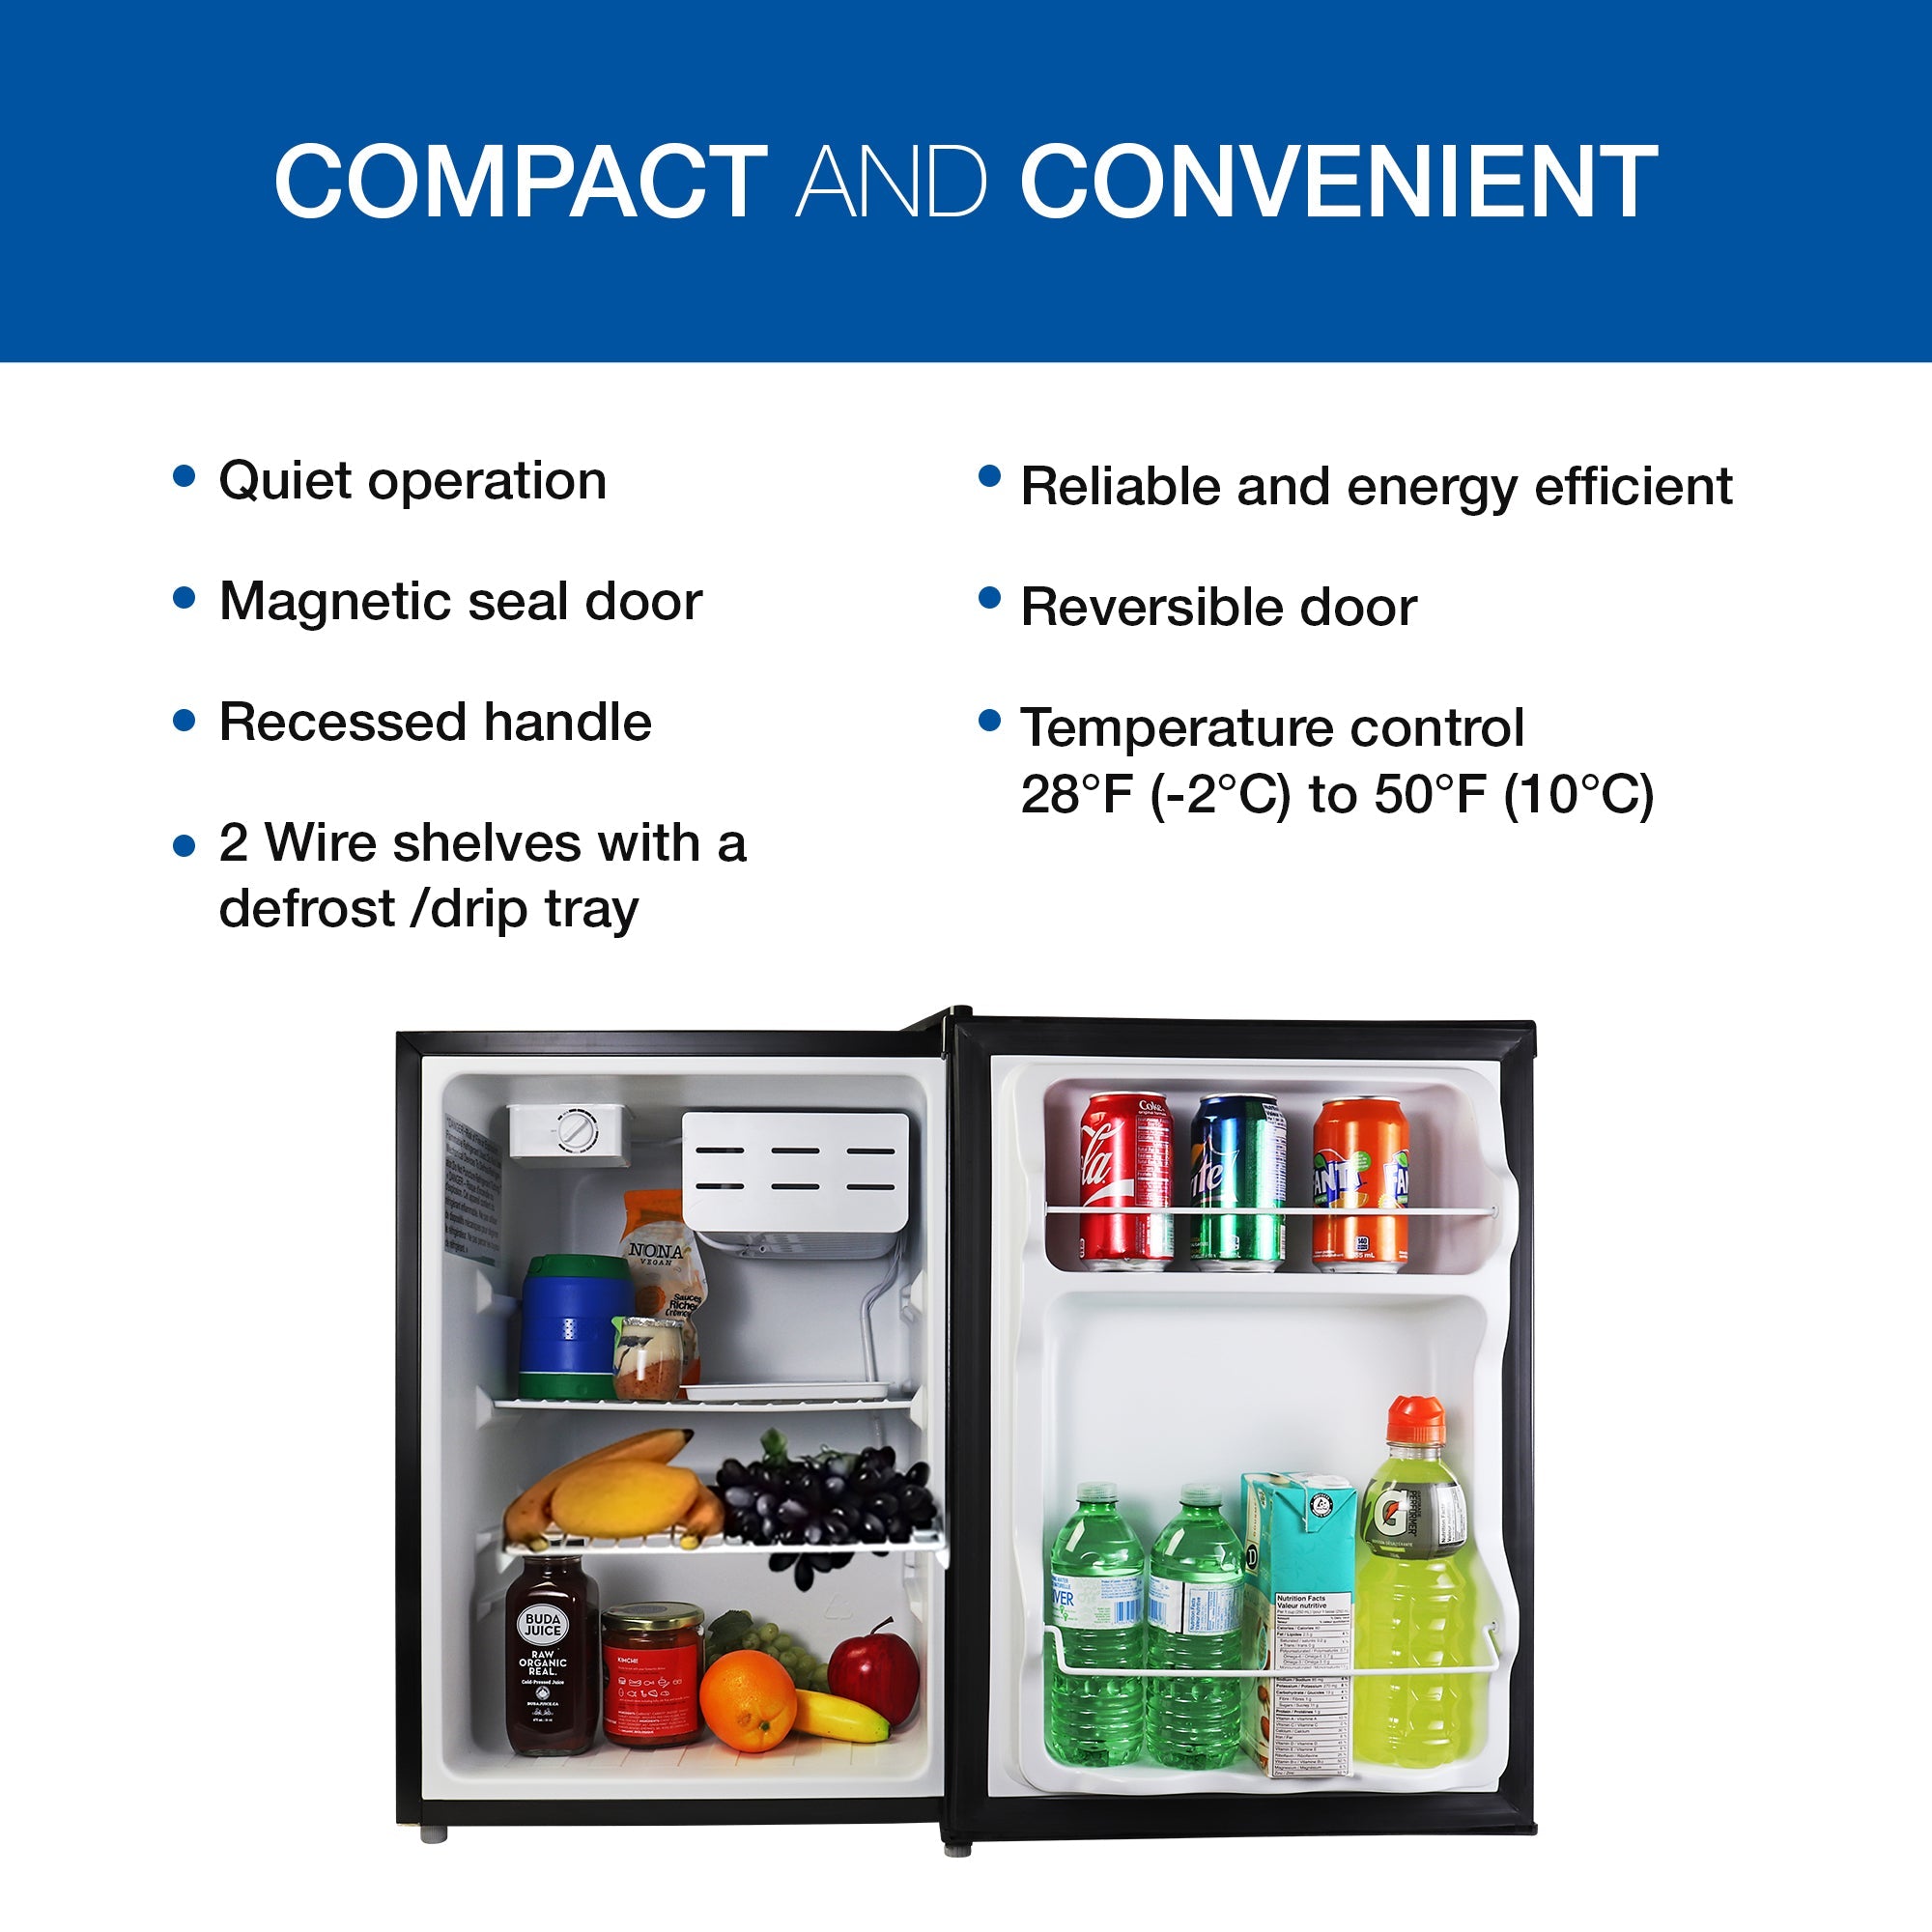 Product shot of compact fridge with freezer open and filled with food items. Text above reads, "Compact and convenient," followed by a list of bullet points: Quiet operation; magnetic seal door; recessed handle; 2 wire shelves with a defrost/drip tray; reliable and energy efficient; reversible door; Temperature control 28F (-2C) to 50F (10C)